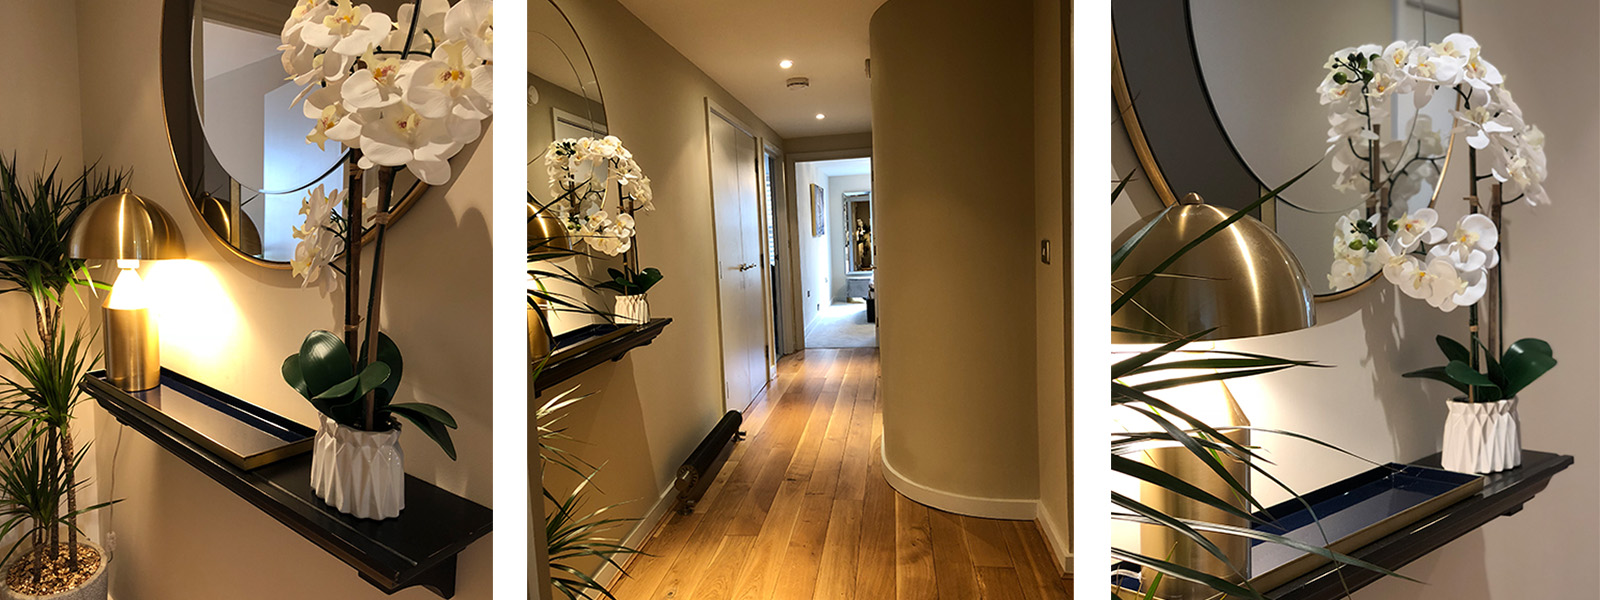 Hallway interior design and styling details by Moji Salehi at Moji Interiors in Hove.